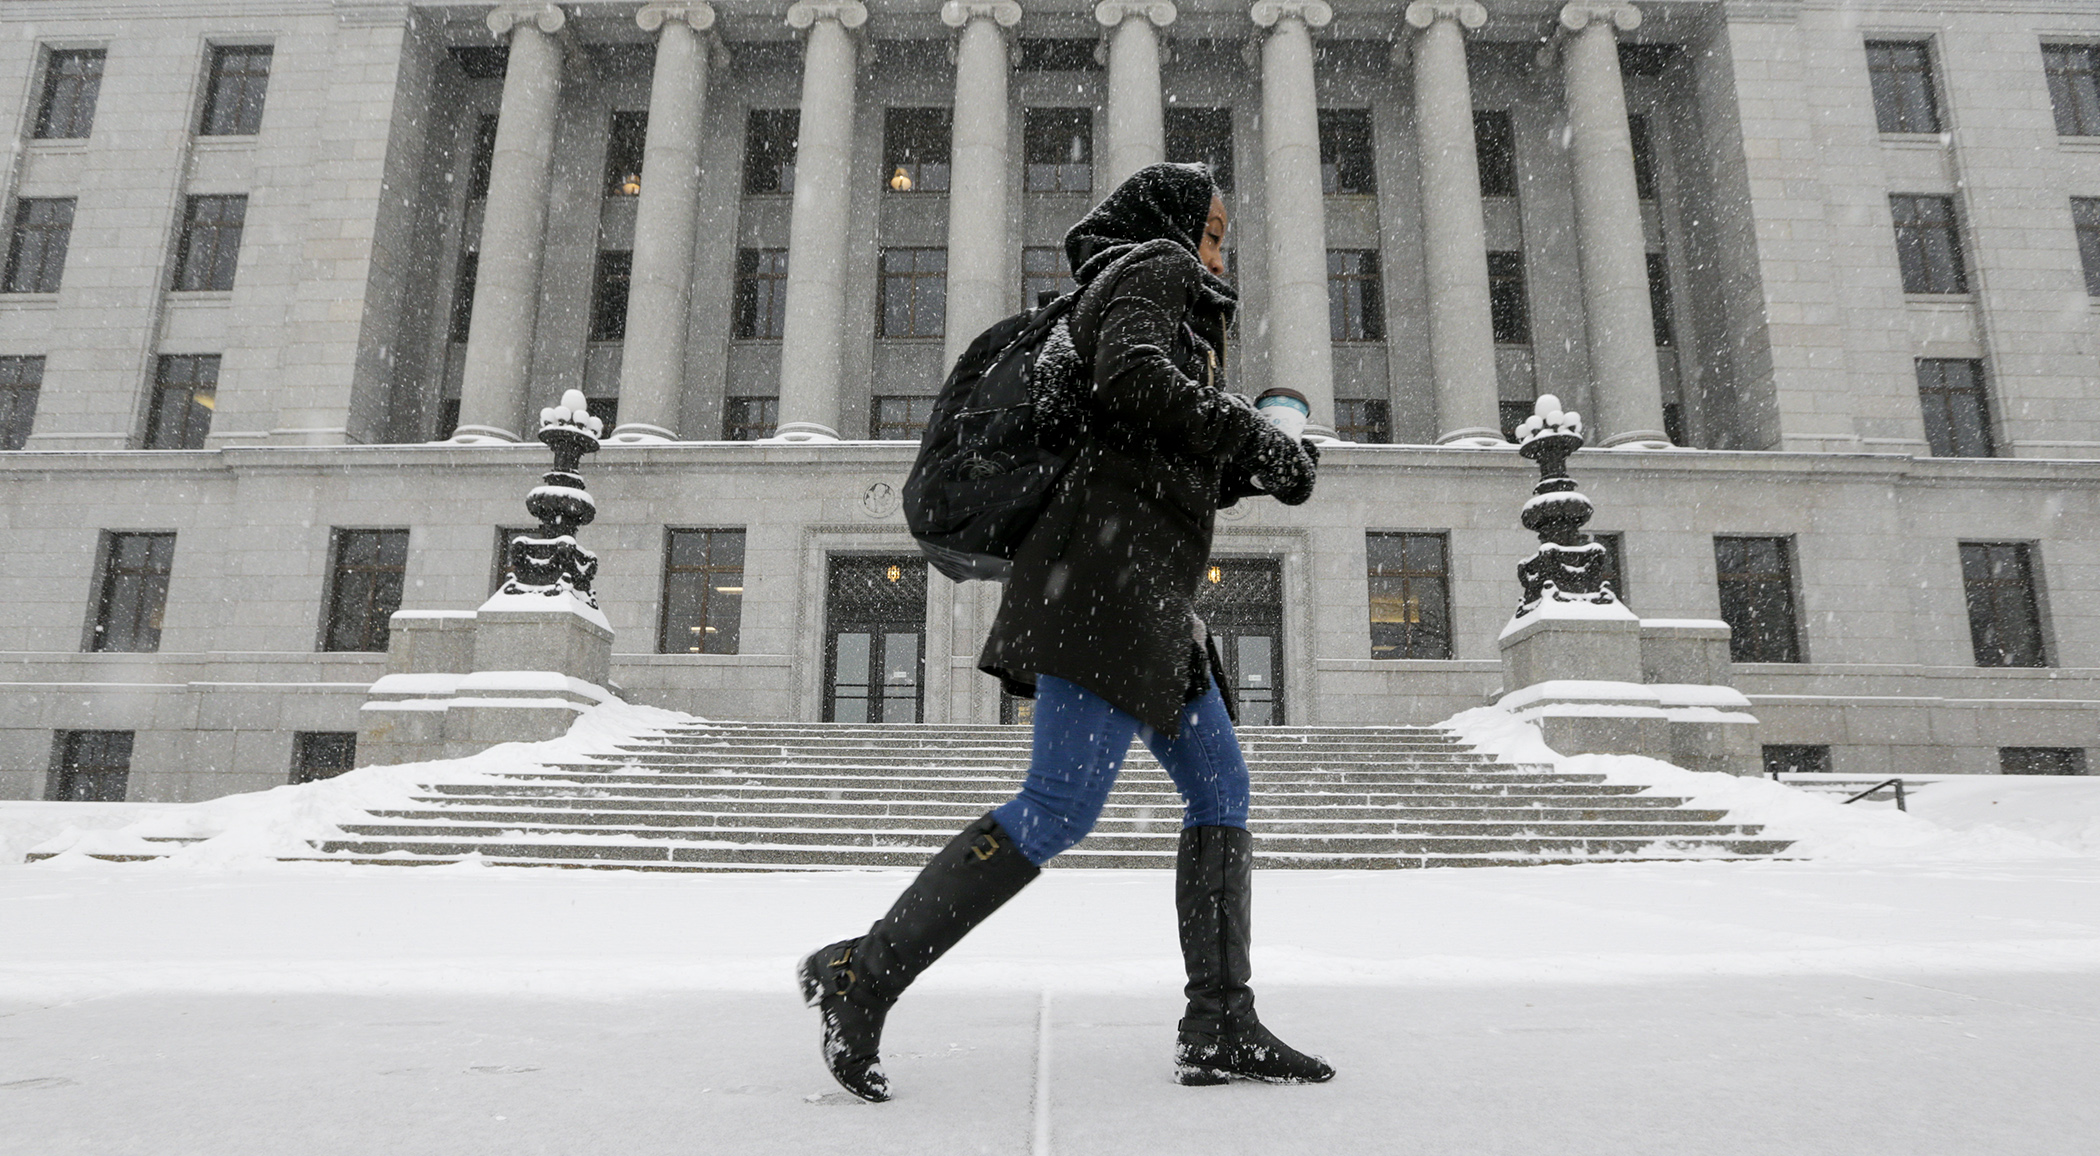 Coffee in hand, a visitor walked past the State Office Building Feb. 7 as another round of snow blanketed the Capitol Mall. | Photo by Paul Battaglia